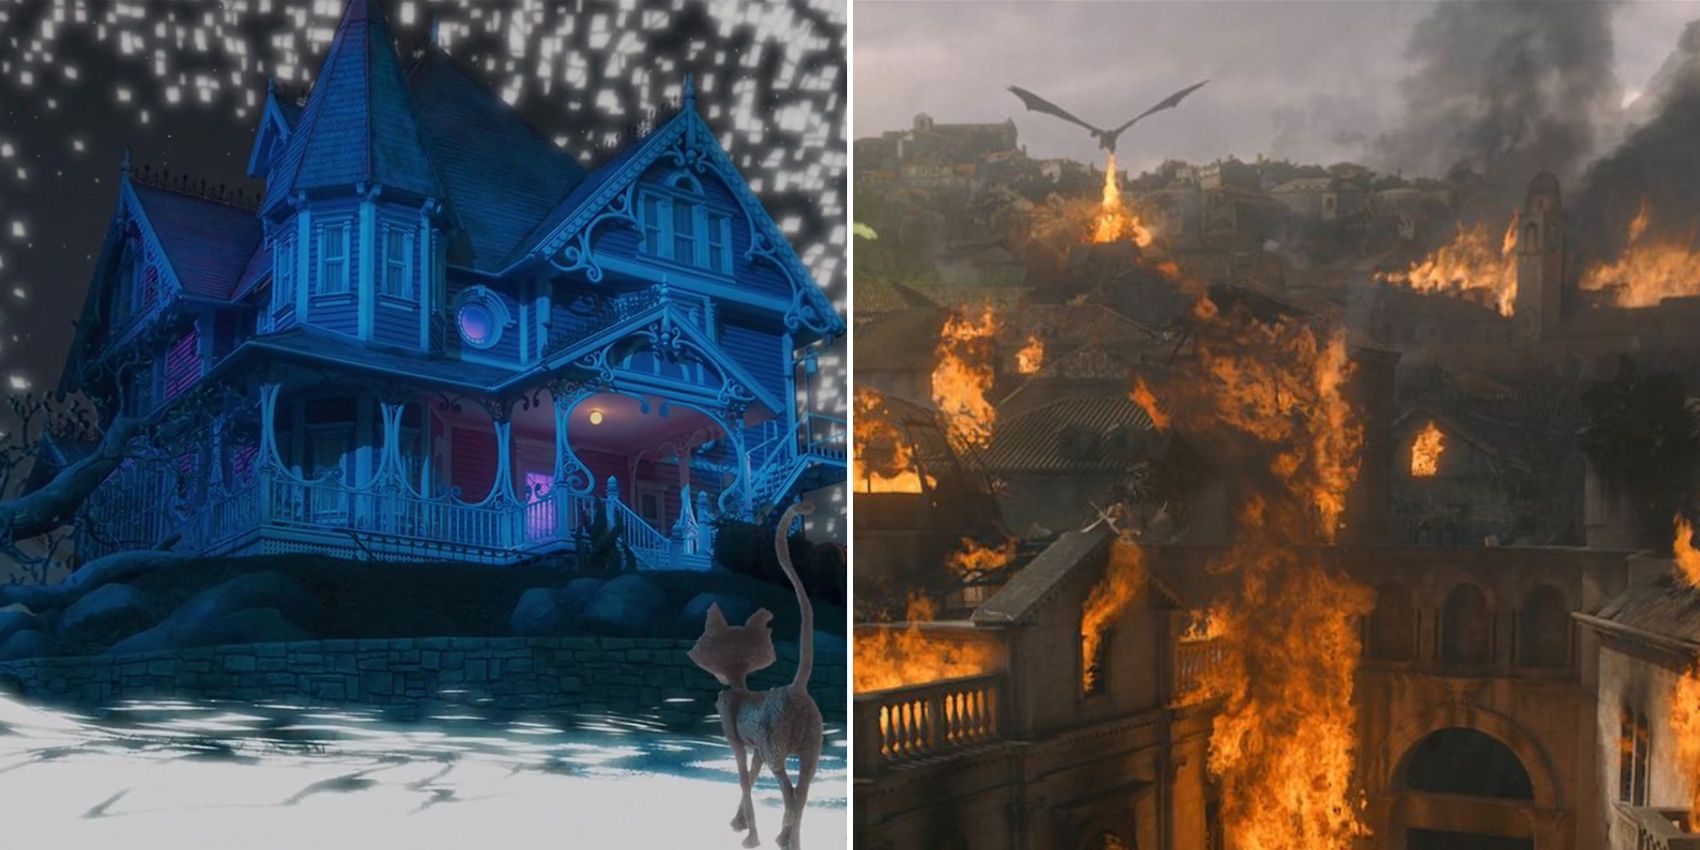 Featured image showing Coraline's Other World and Game of Thrones' Westeros